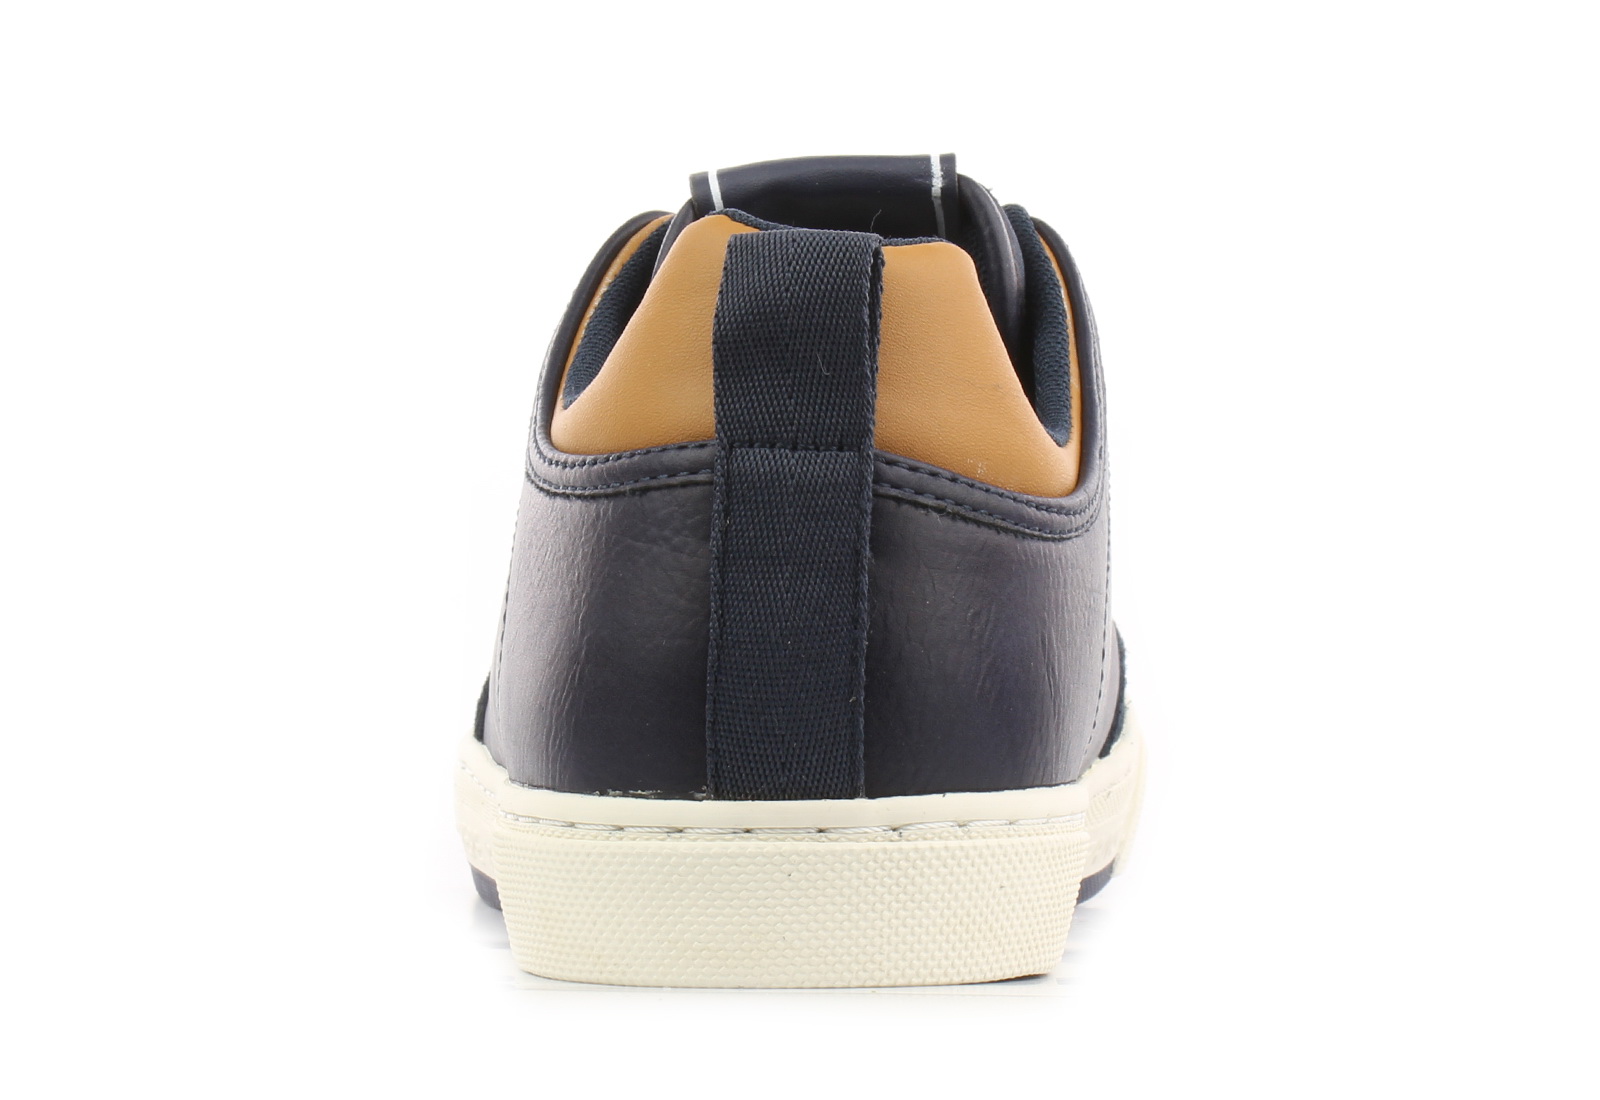 Pepe Jeans Trainers - Rodney Basic 21 - PMS30767595 - Online shop for  sneakers, shoes and boots